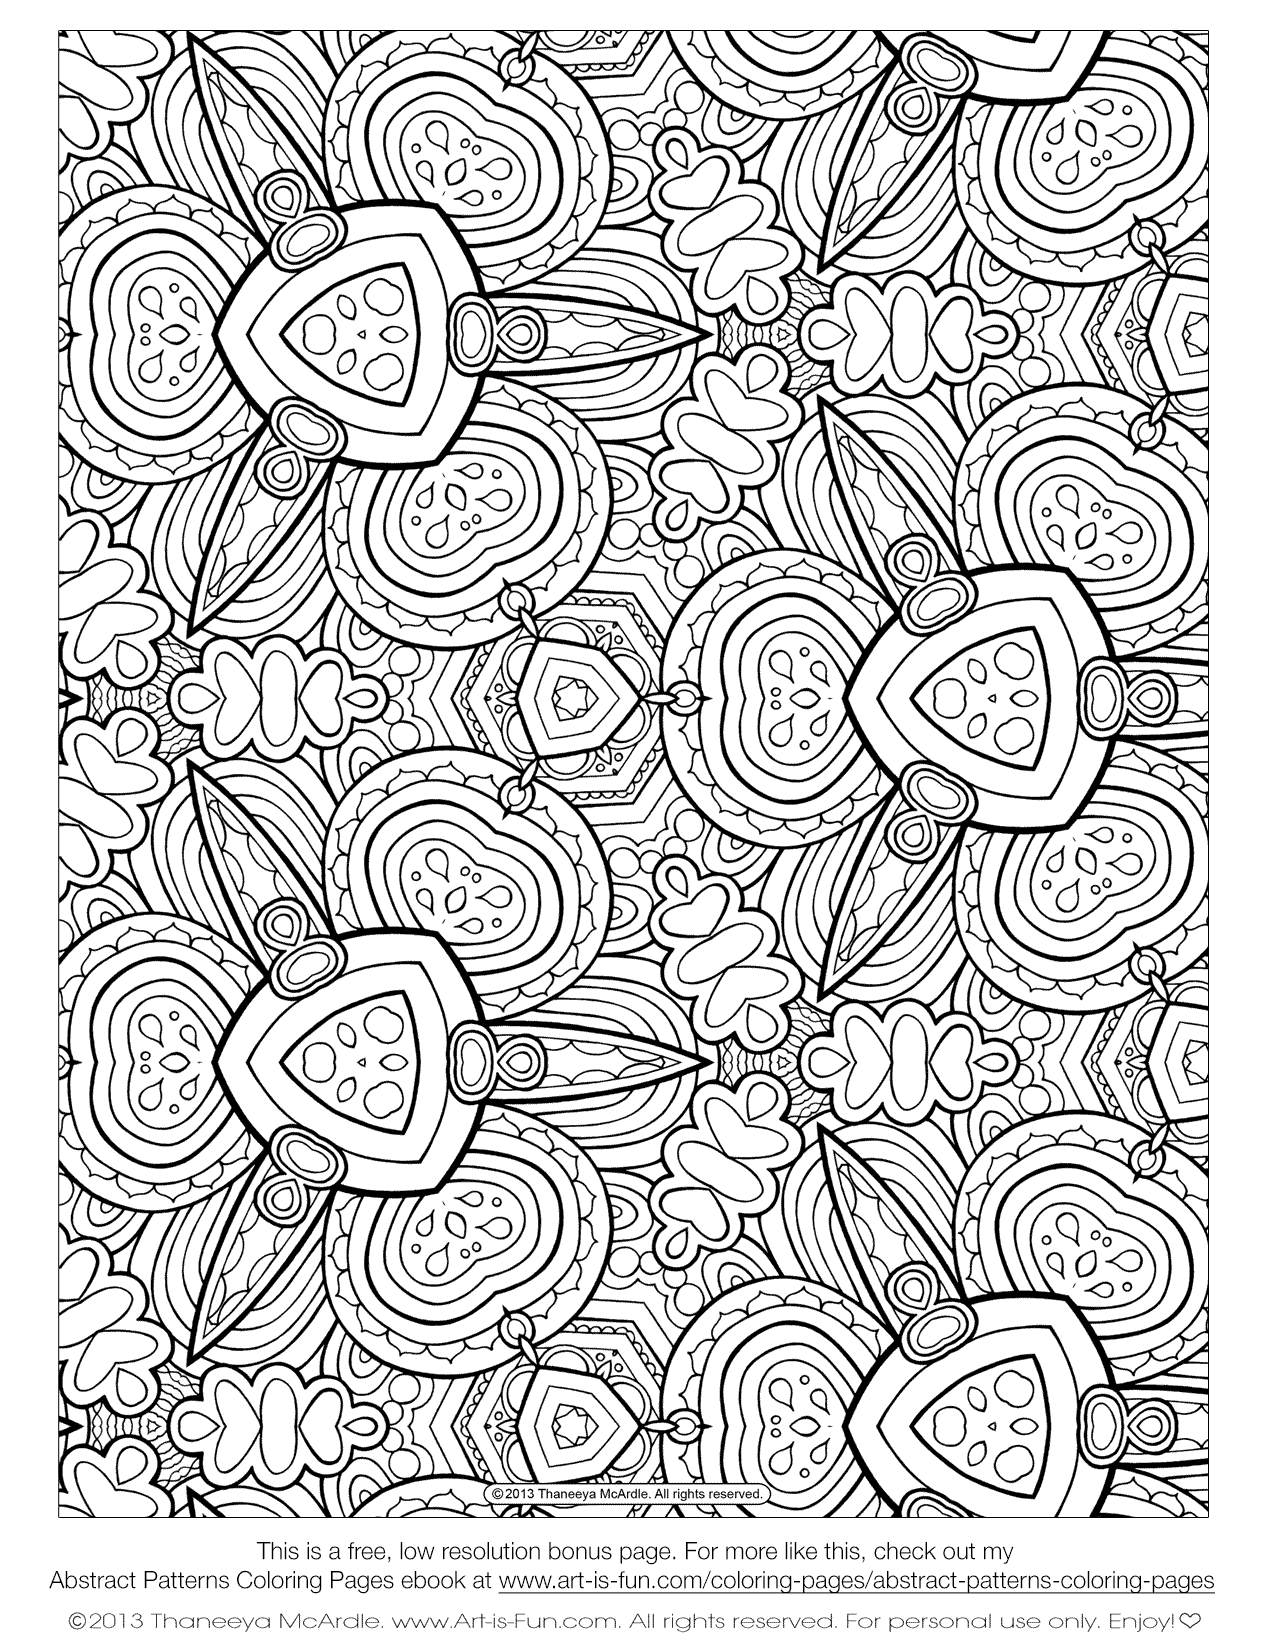 colouring therapy patterns art therapy coloring pages free adult coloring pages therapy patterns colouring 